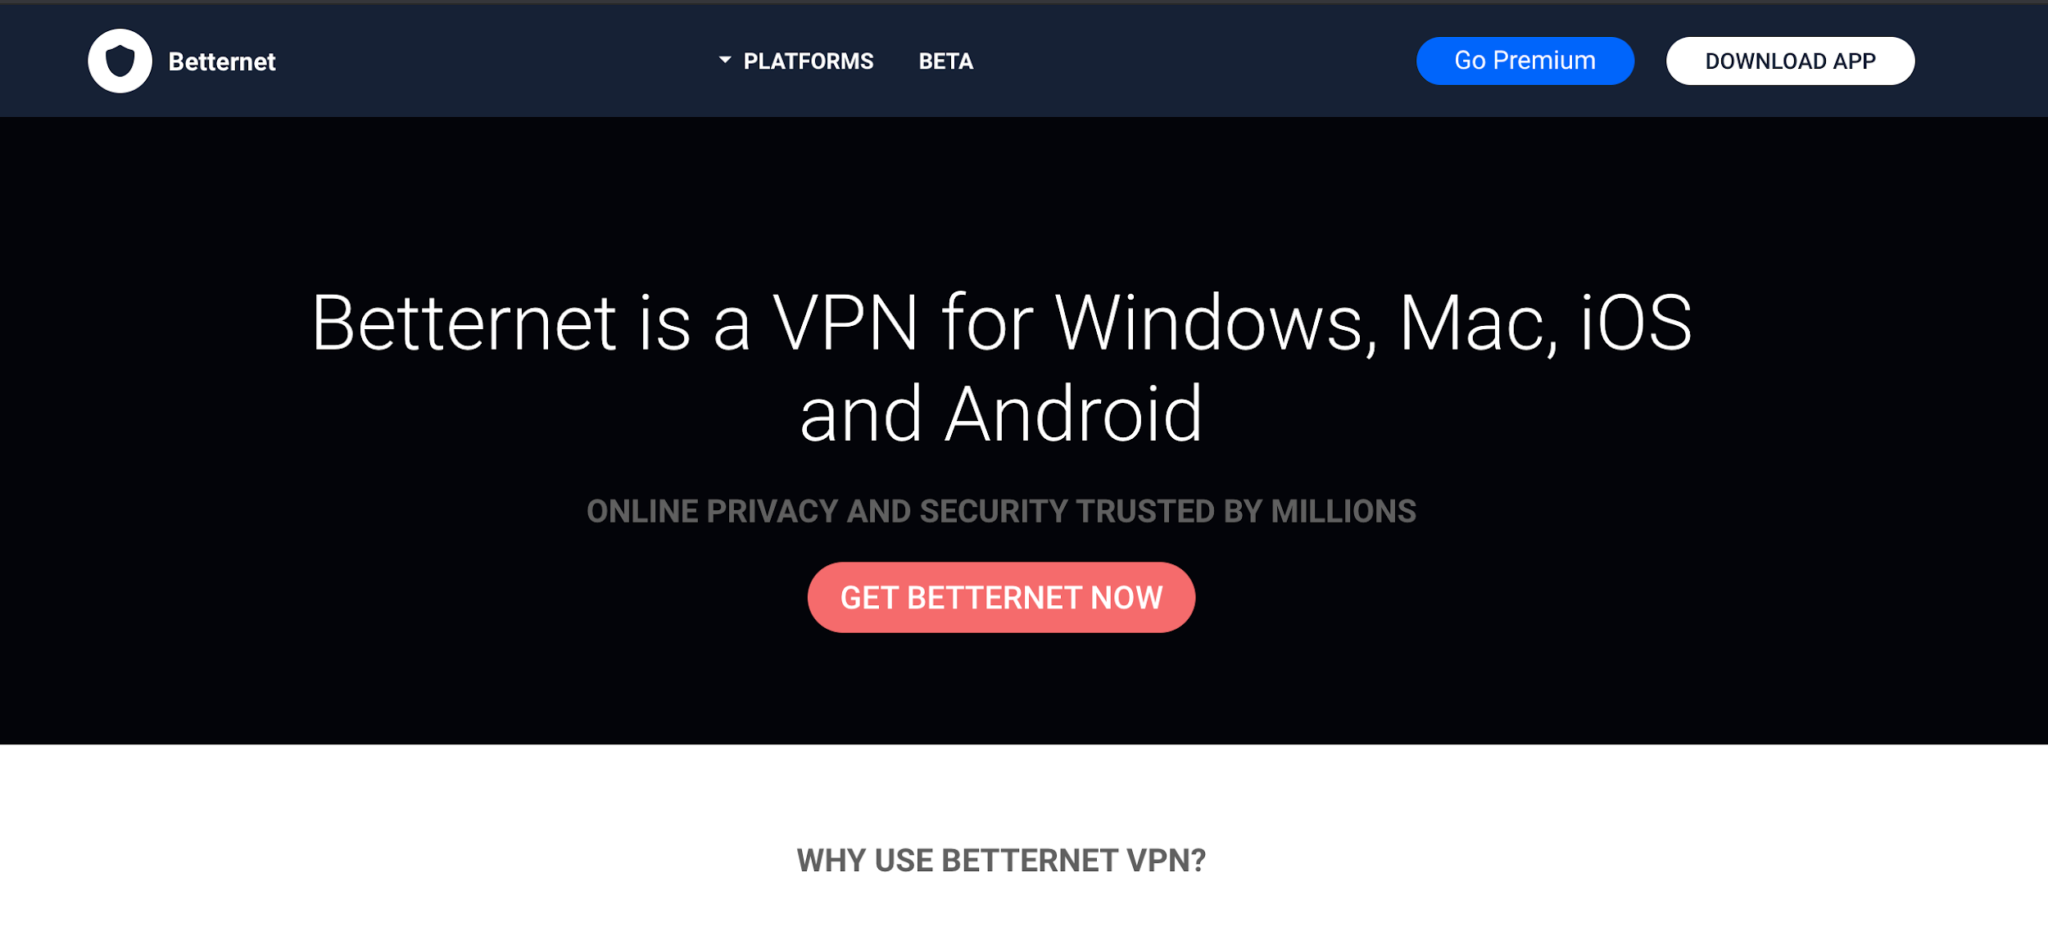 How To Find The Best Free VPN in 2020? | Techno FAQ